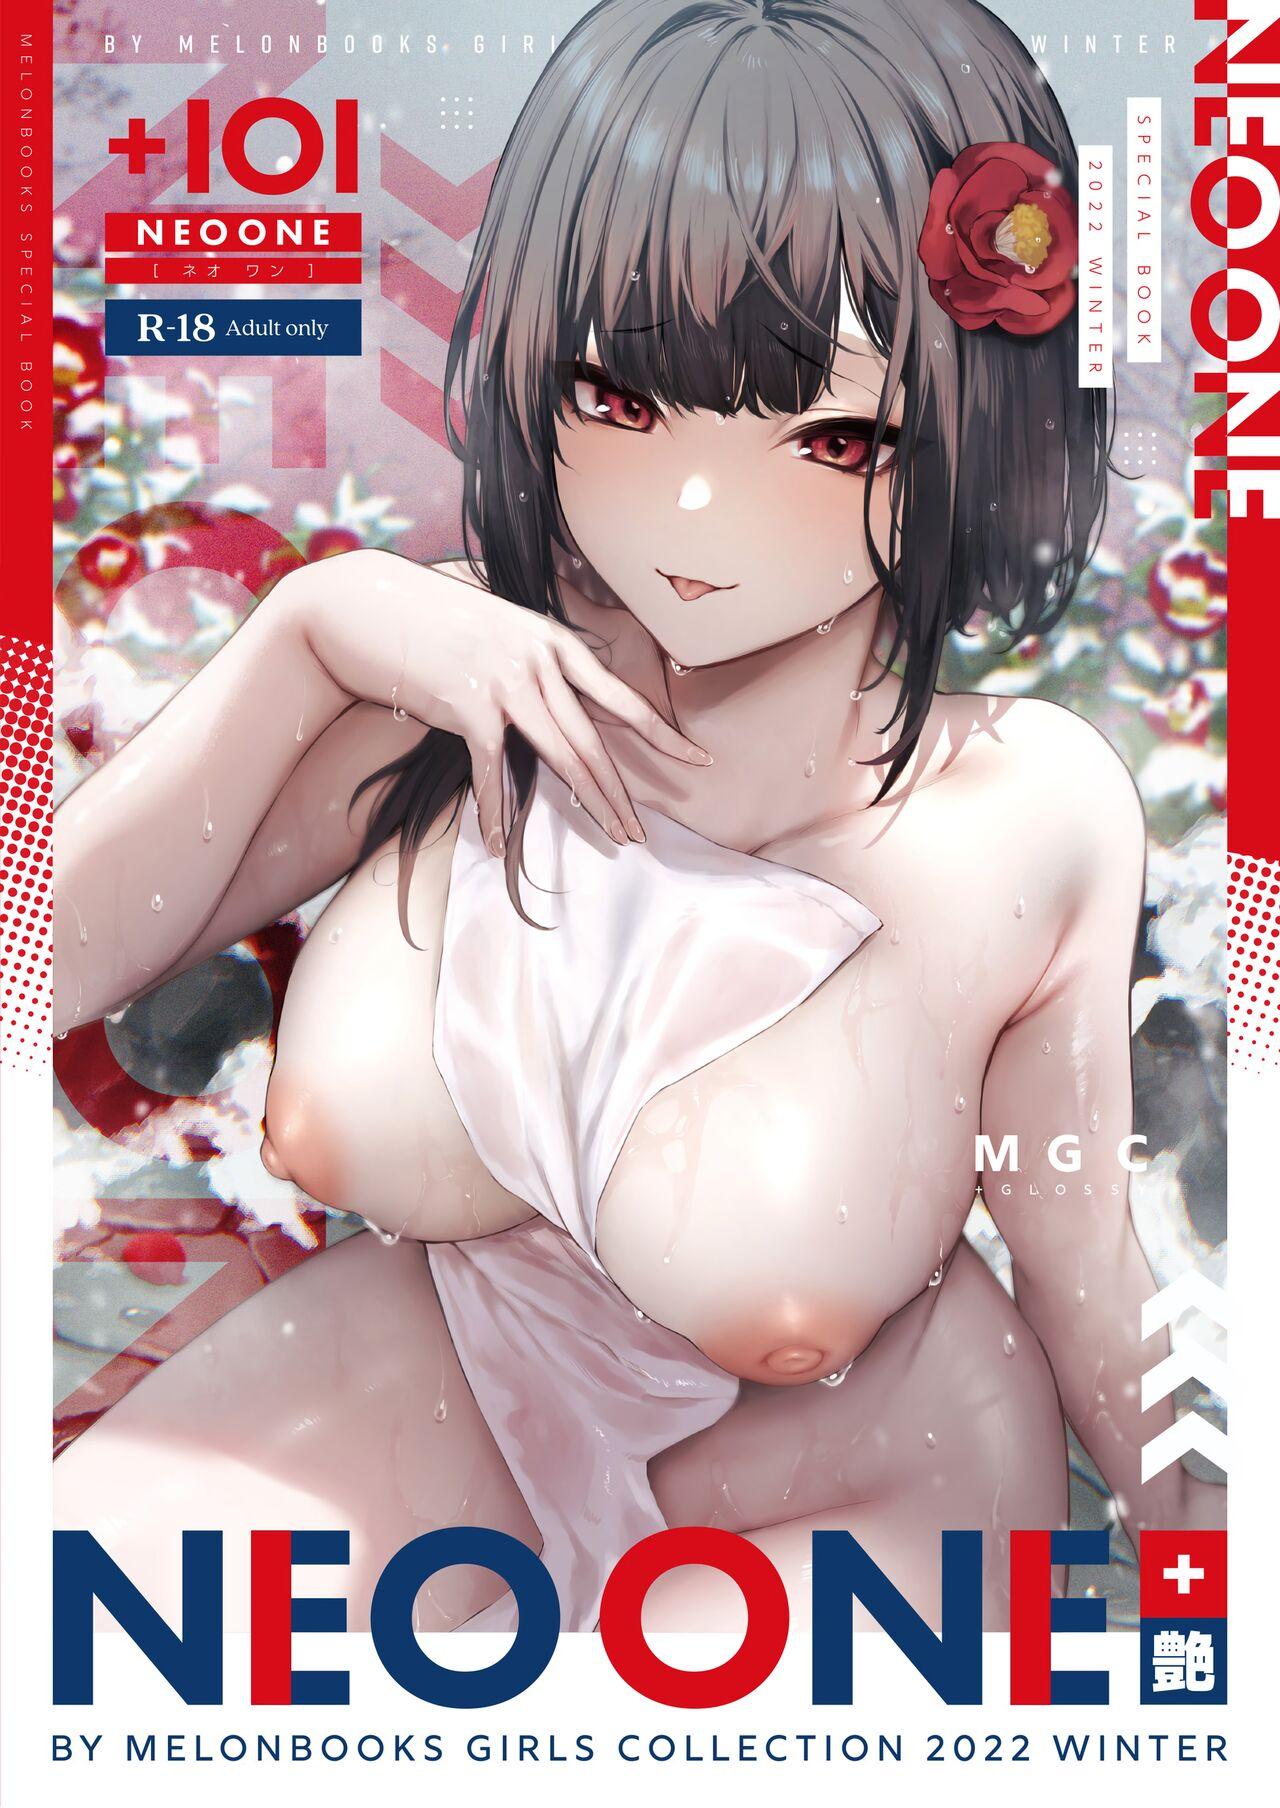 NEO ONE 艶 by Melonbooks Girls Collection 2022 WINTER 0